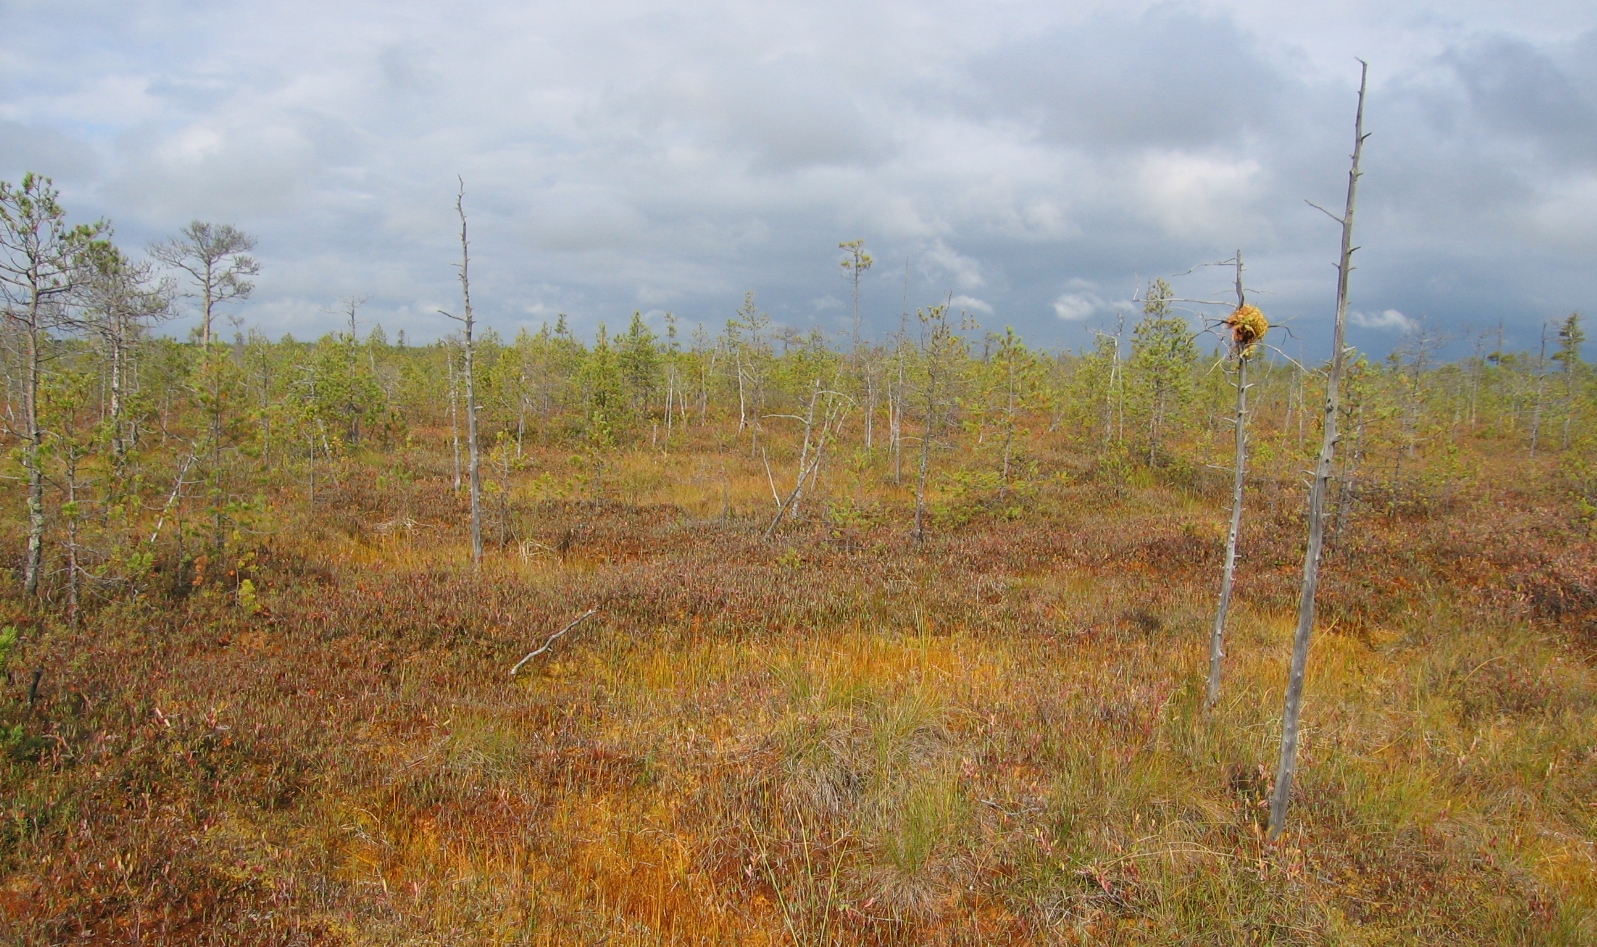 Peatland mosses are unable to regulate their water loss - photo: Martin Wilmking